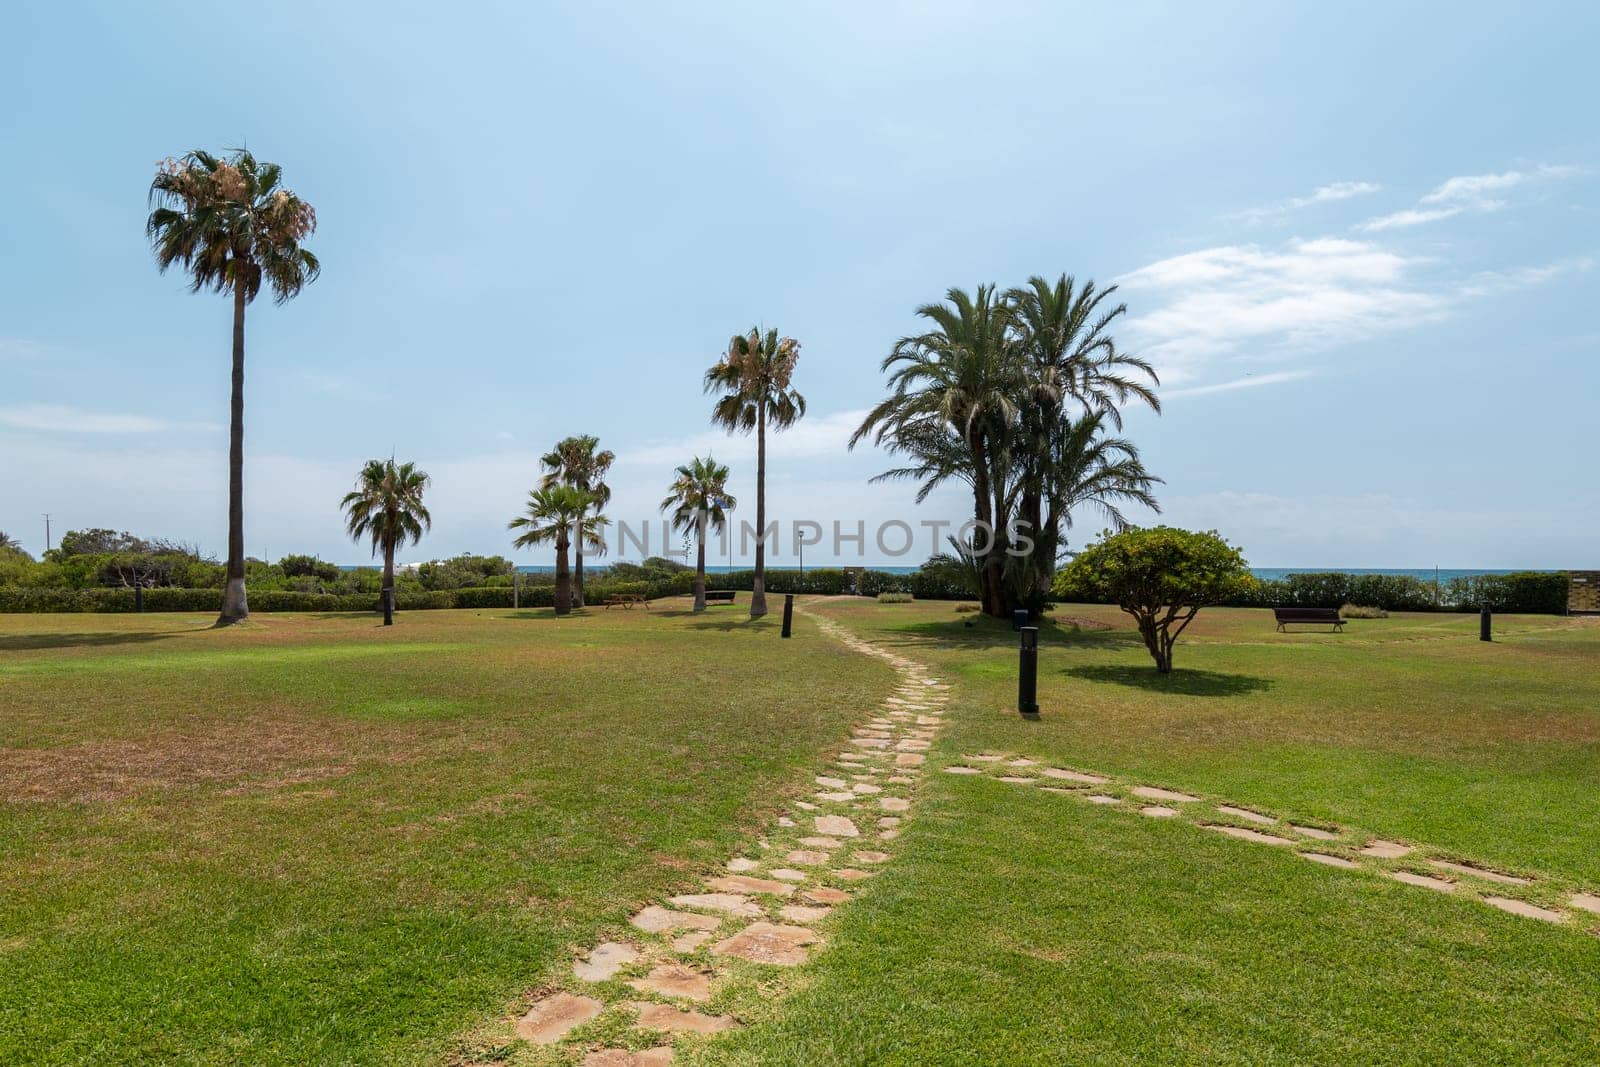 Pathway through a sunny park with palm trees leading towards the sea by apavlin